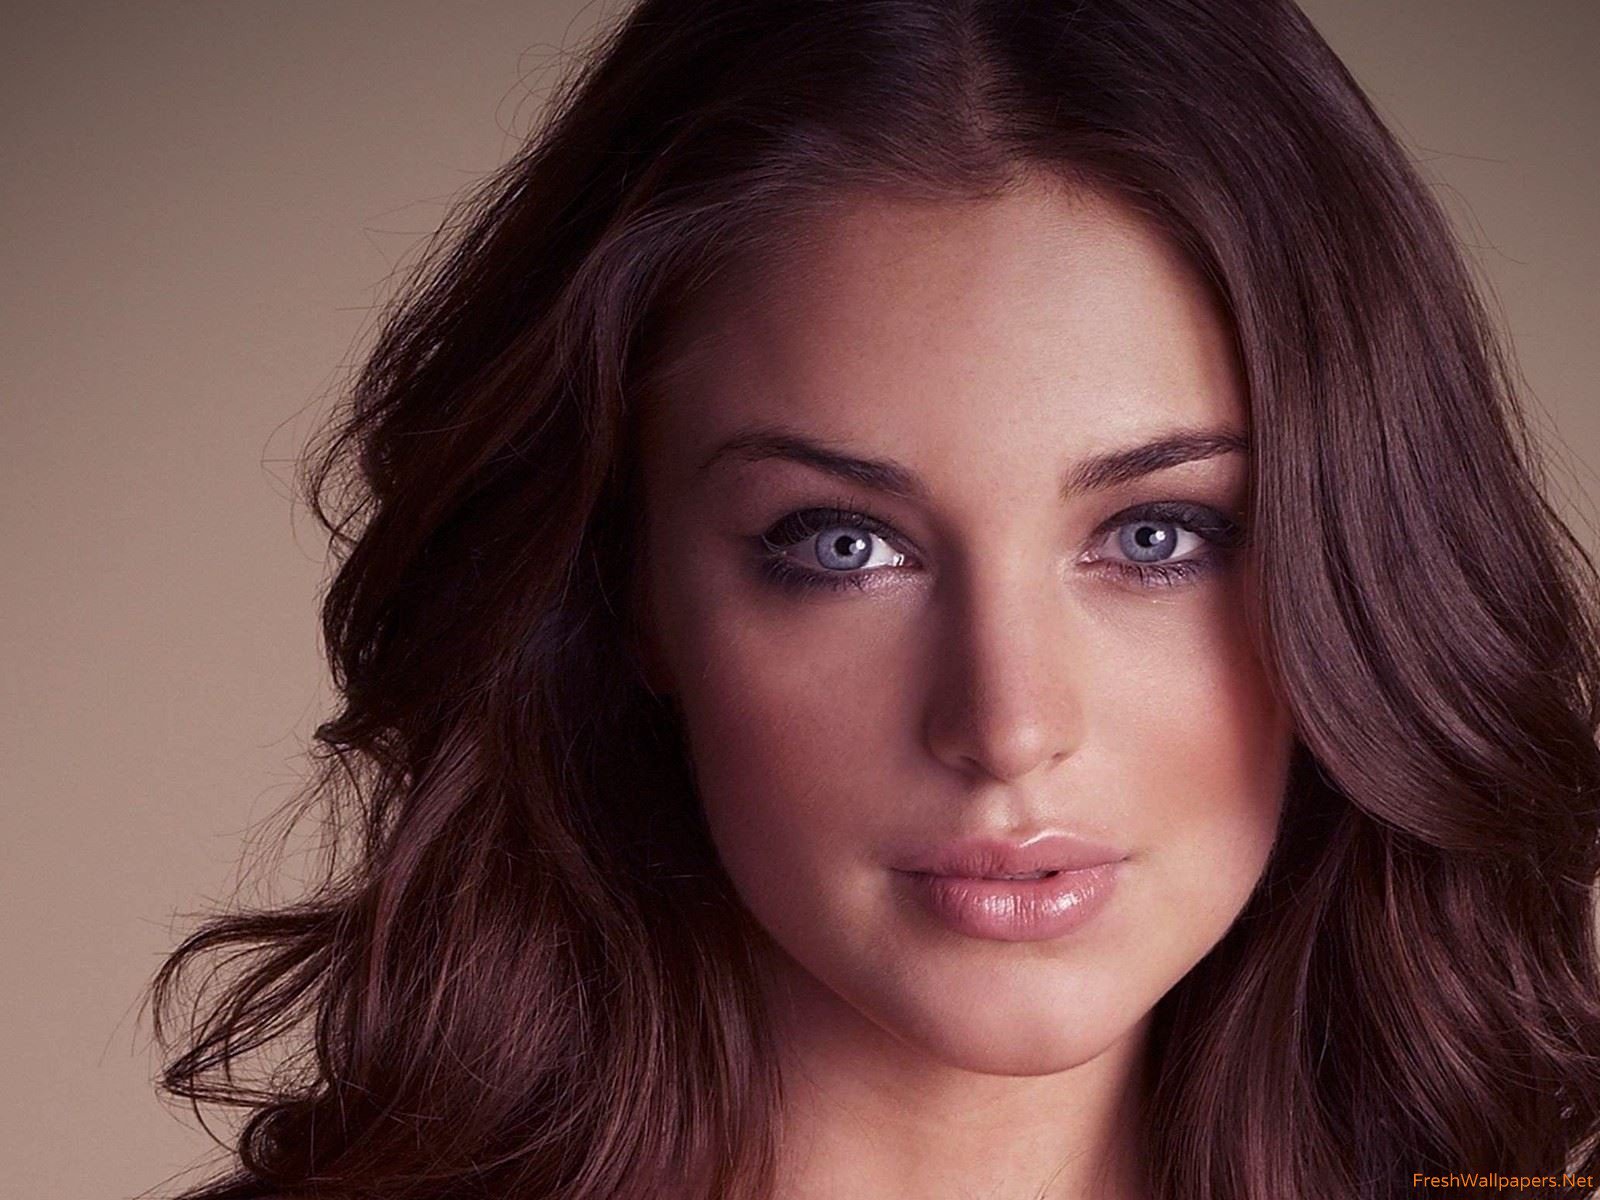 Brace Your Eyes: The Most Beautiful Women on Earth